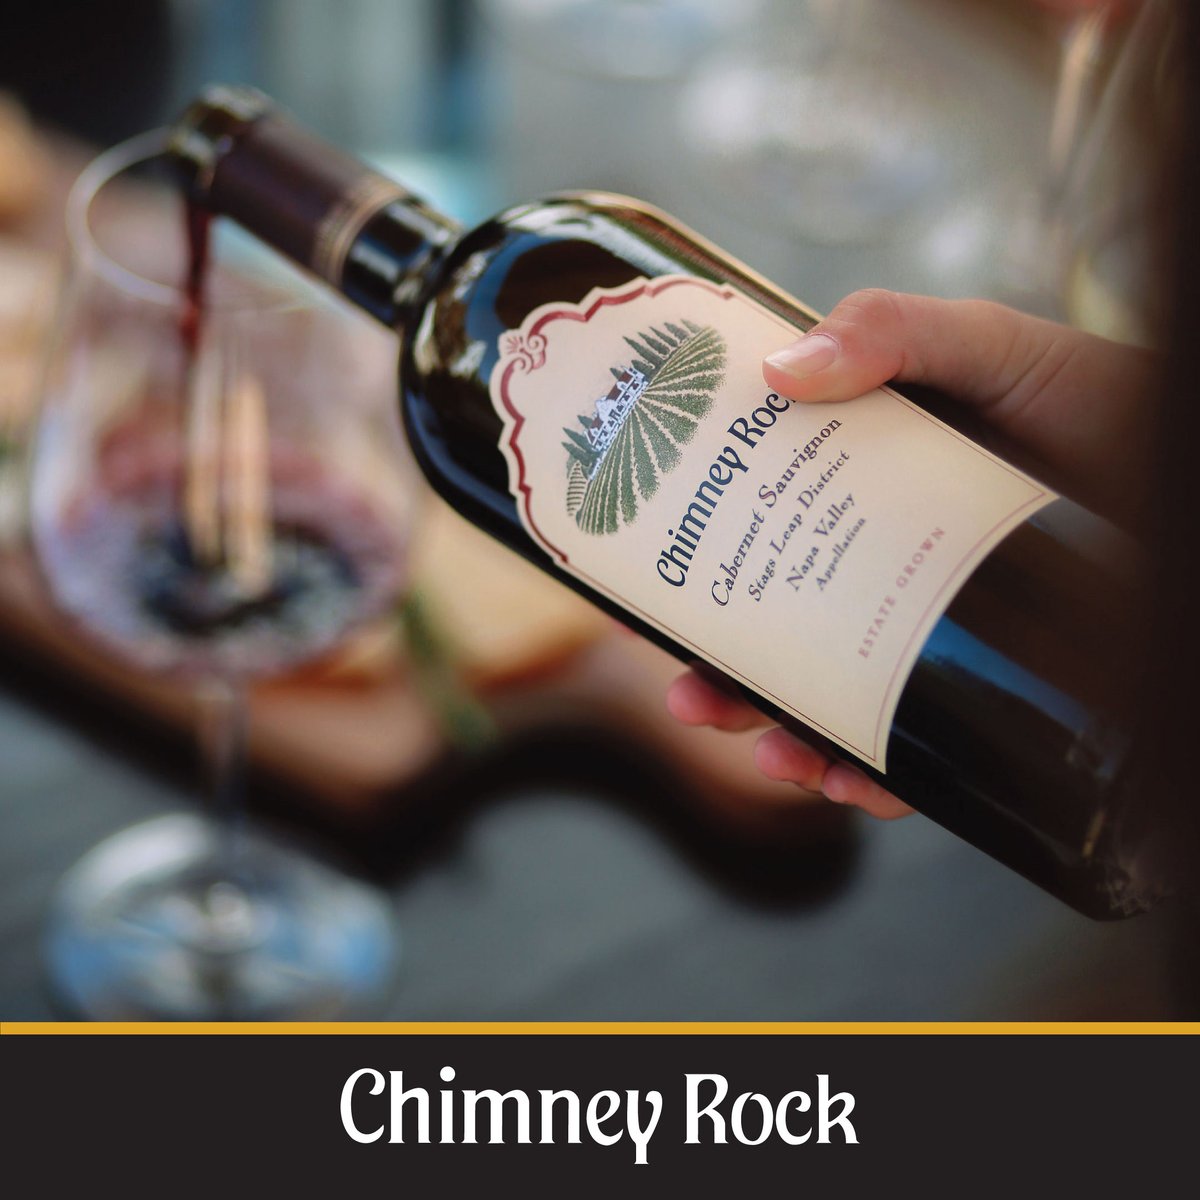 #ChimneyRockWinery is featured on the new @FOXTV show: Gordon Ramsay's Food Stars! Chimney Rock's episode airs June 7 (9pm EST) when contestants are mentored by Winemaker Elizabeth Vianna and @GordonRamsay to become the next great culinary entrepreneur: https://t.co/CBsXEj2YTP! https://t.co/ljjpdhyVWS